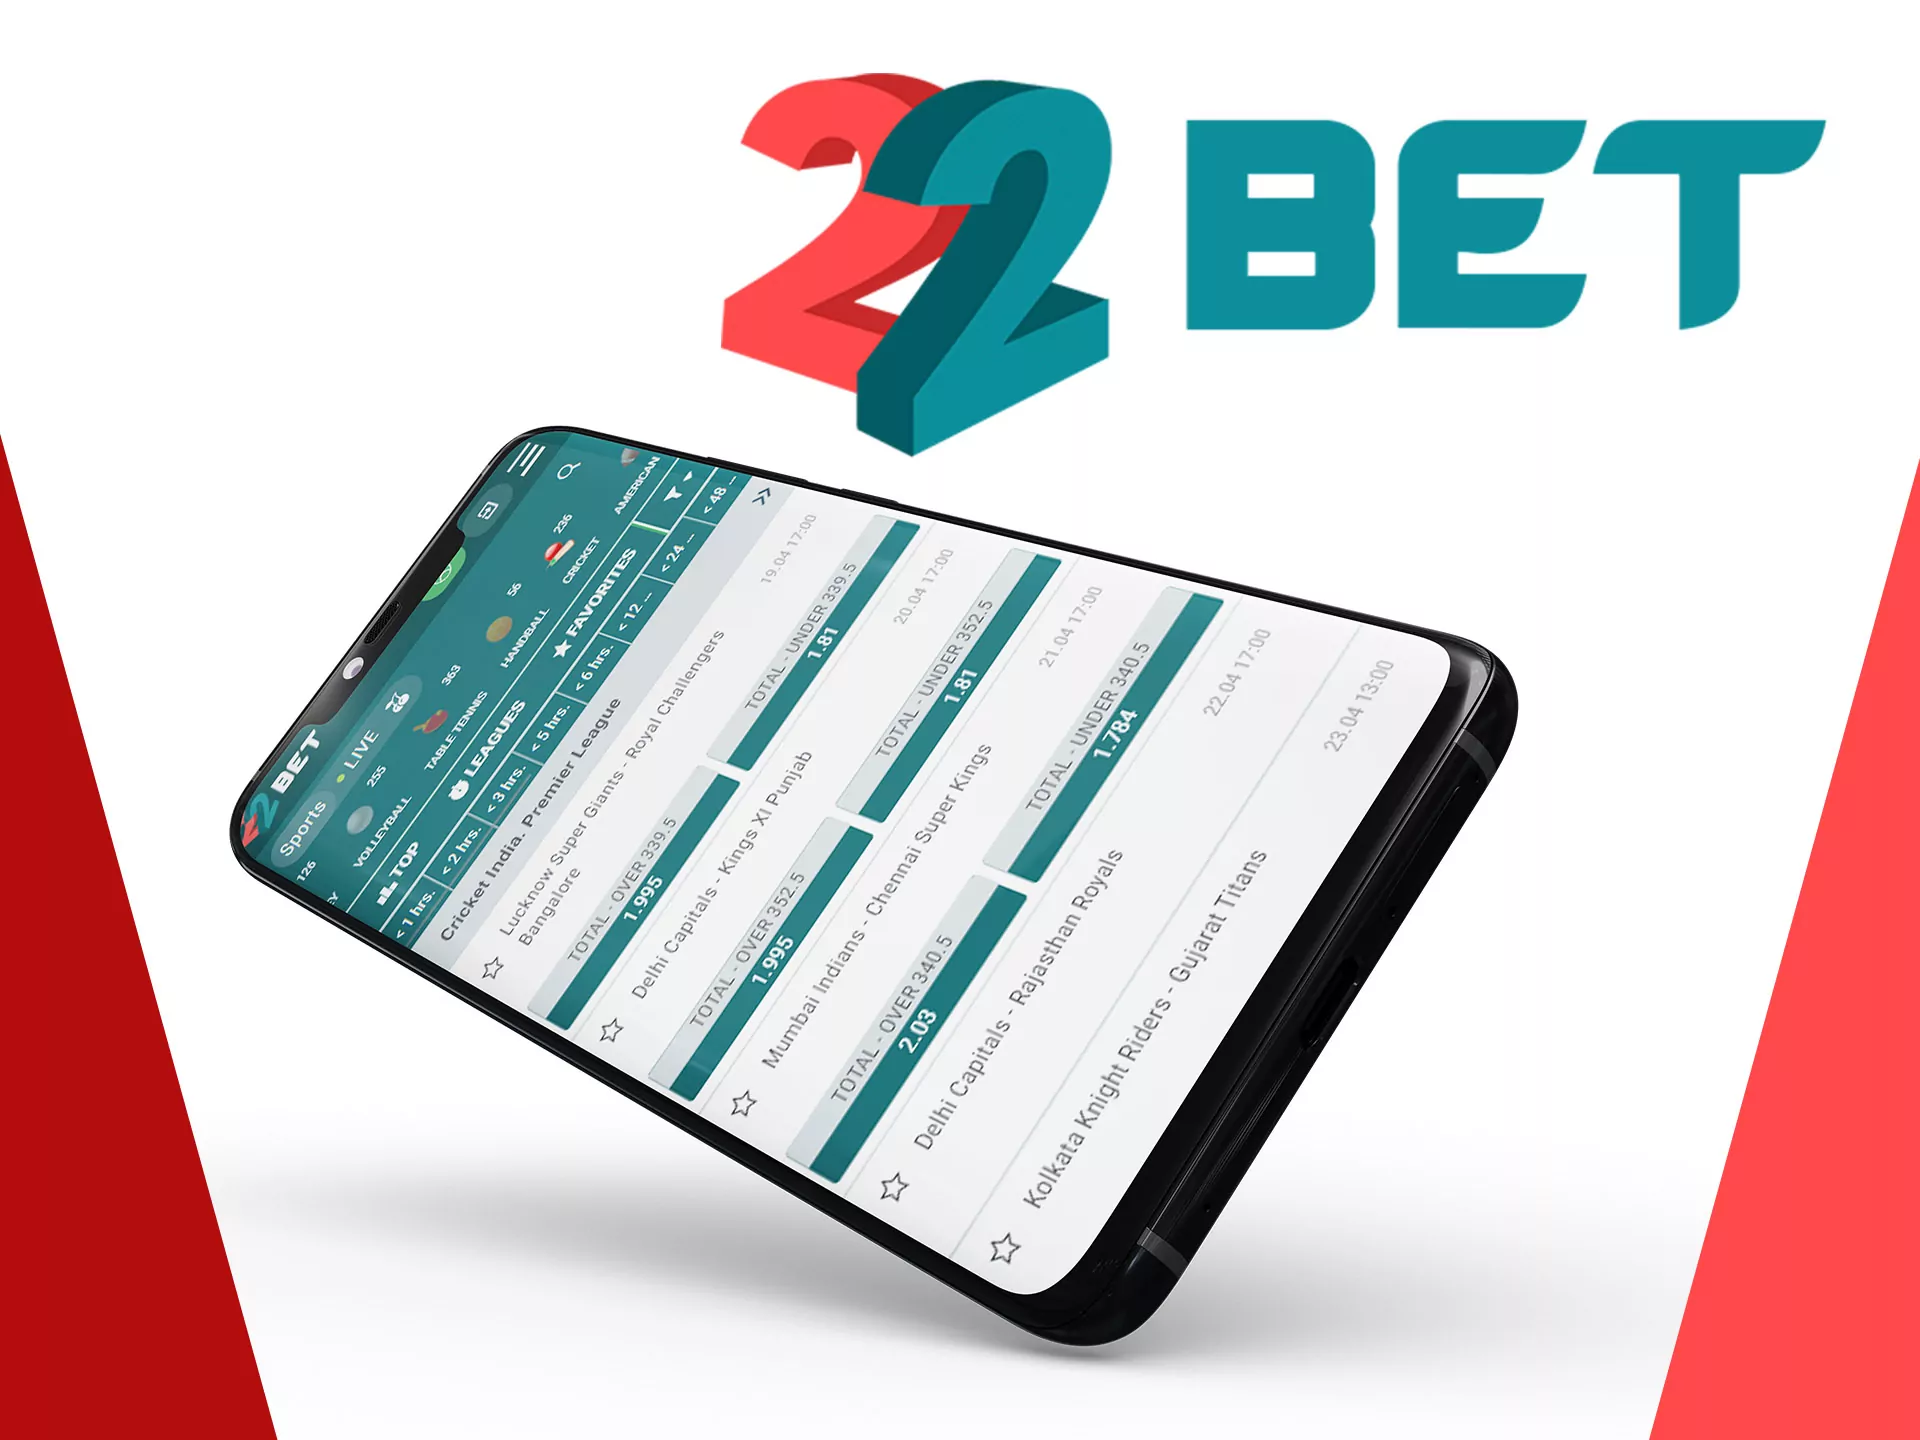 22bet is a best site for betting.